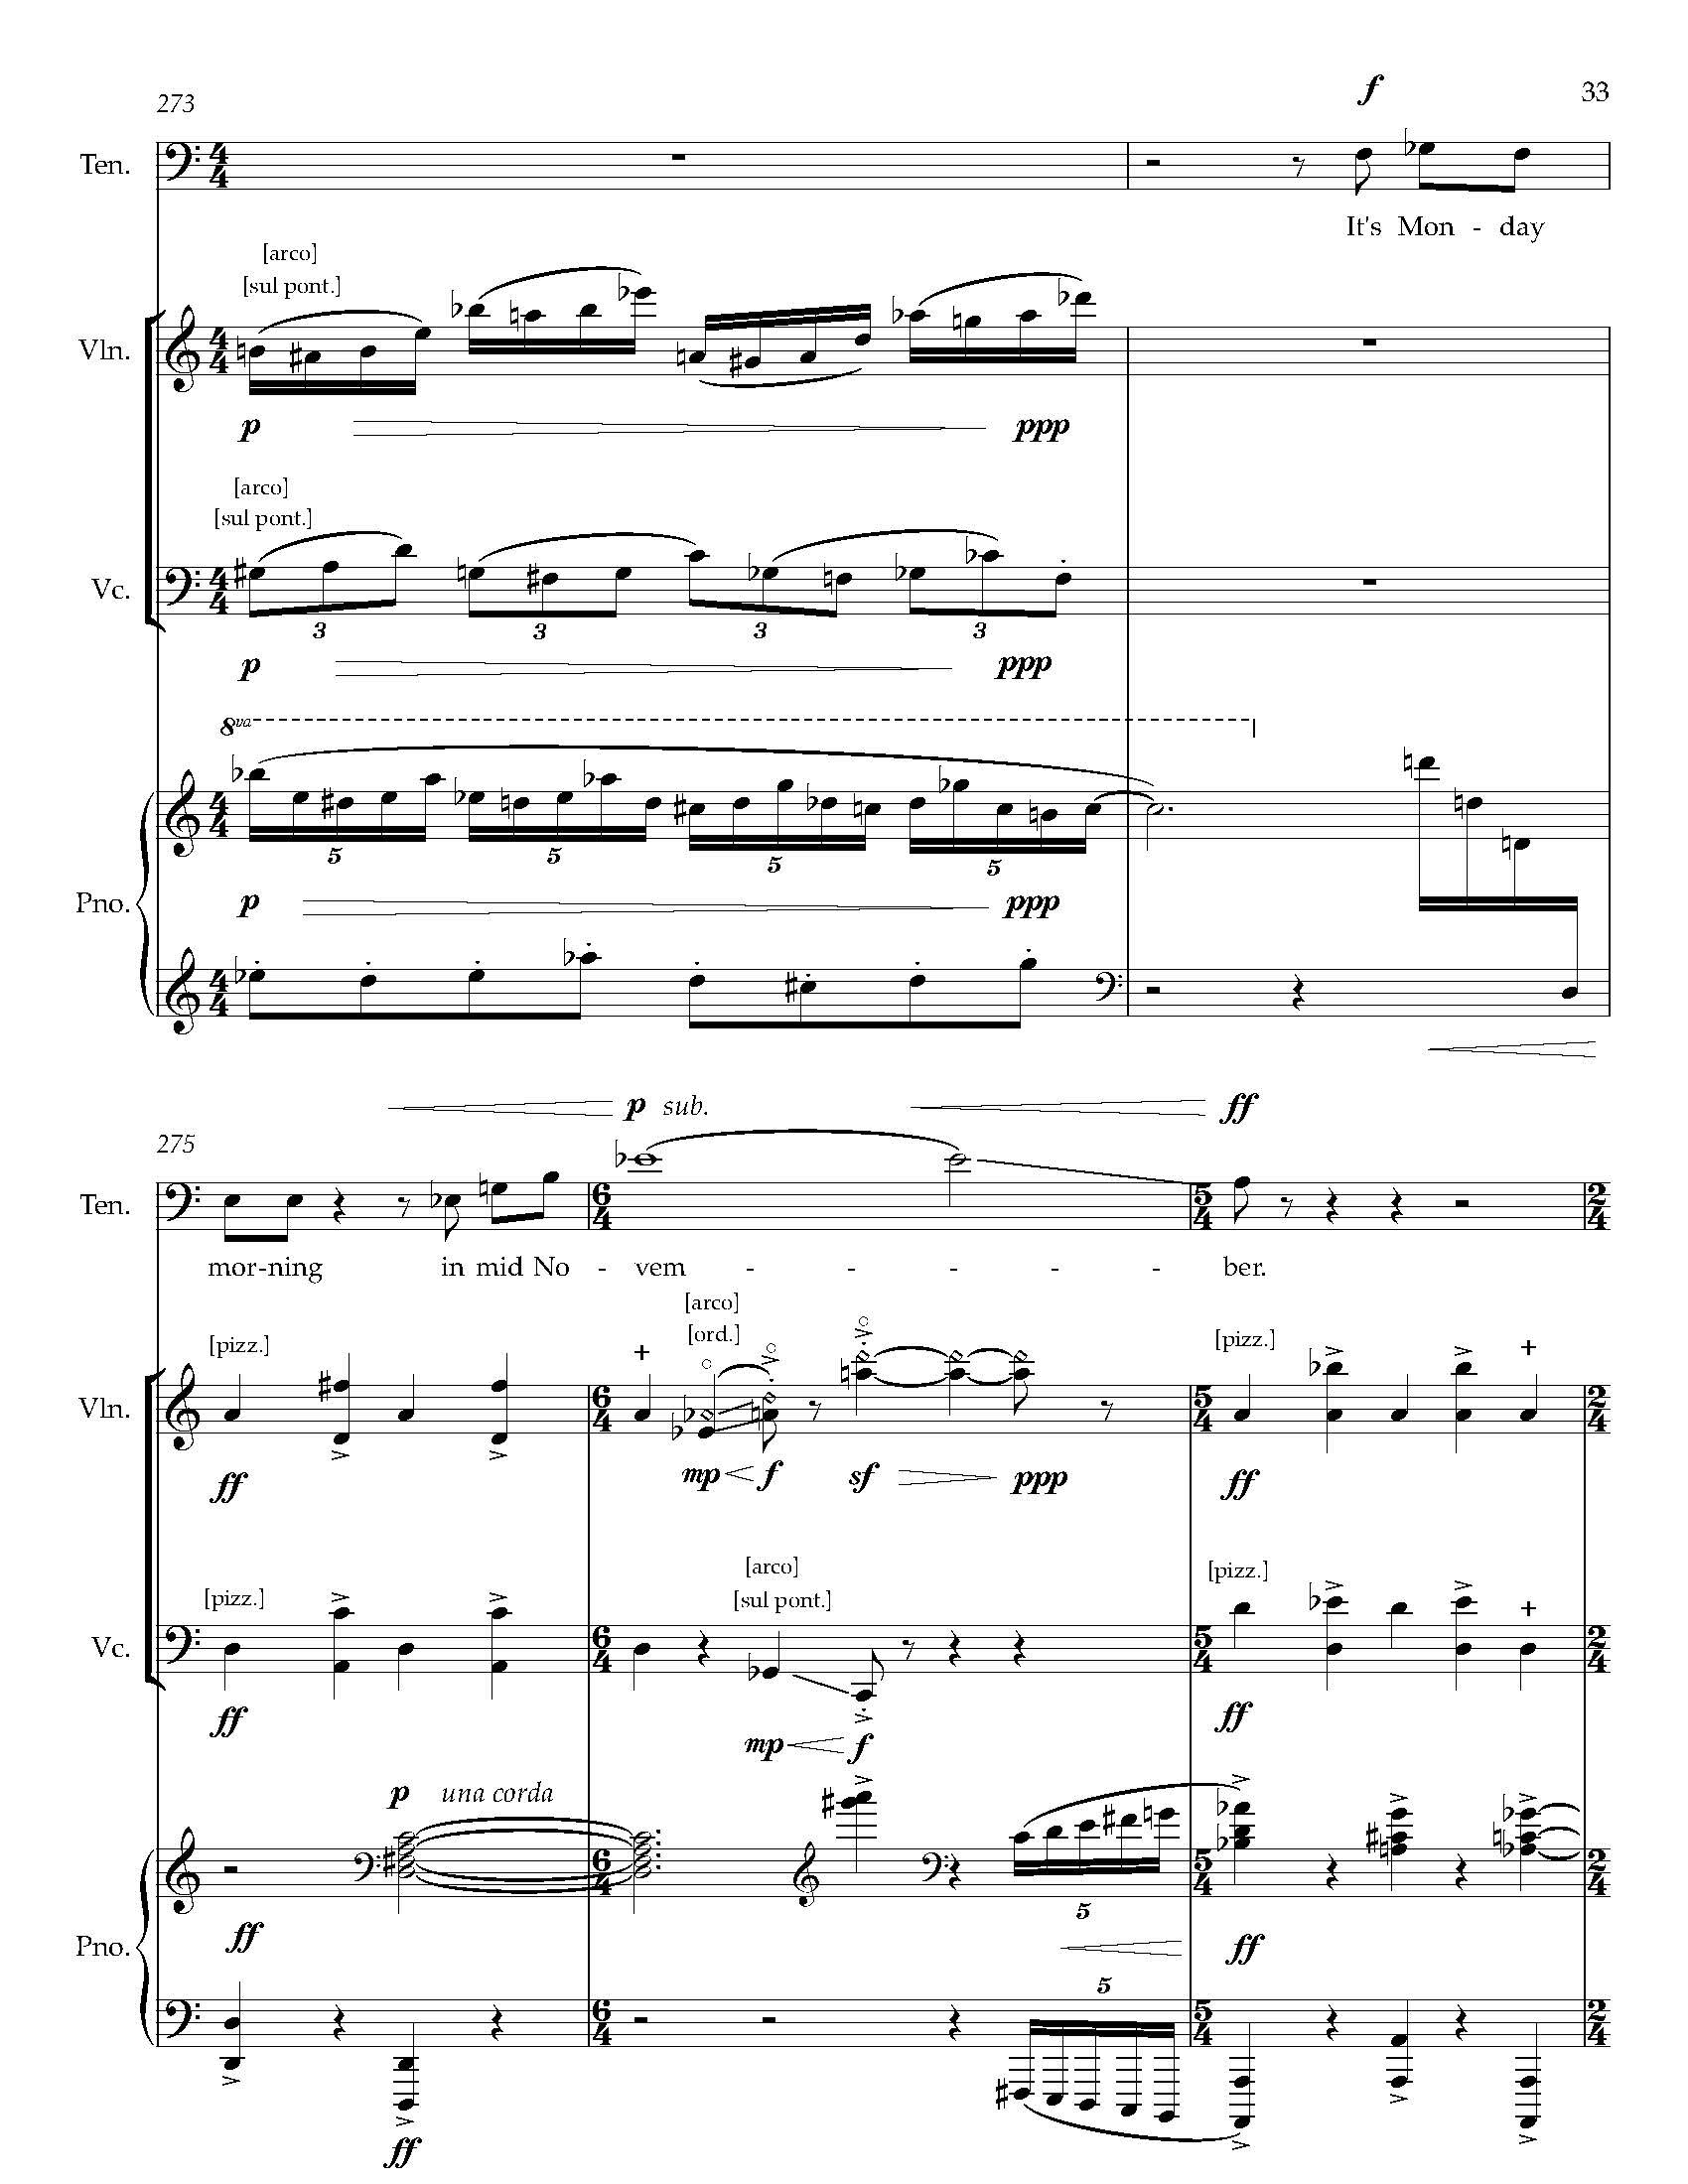 Gursky Songs - Complete Score_Page_41.jpg